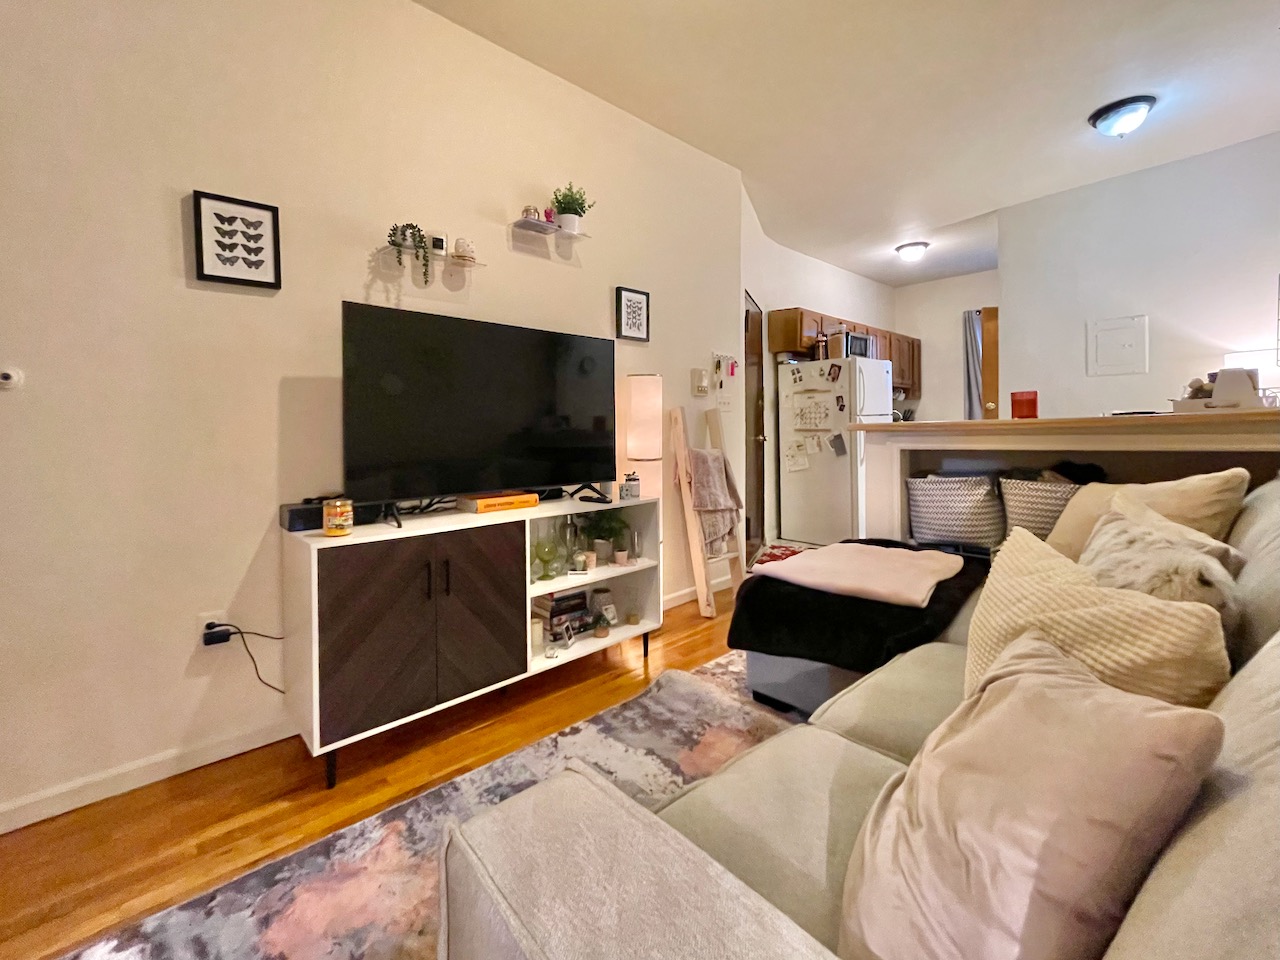 This one bedroom apartment features an eat-in kitchen with breakfast bar, an oversized bedroom, and hardwood floors throughout. Located in a great Midtown Hoboken location, allowing for easy transportation for commuters who can also enjoy close proximity to great restaurants, shopping, and parks. Available May 15th.